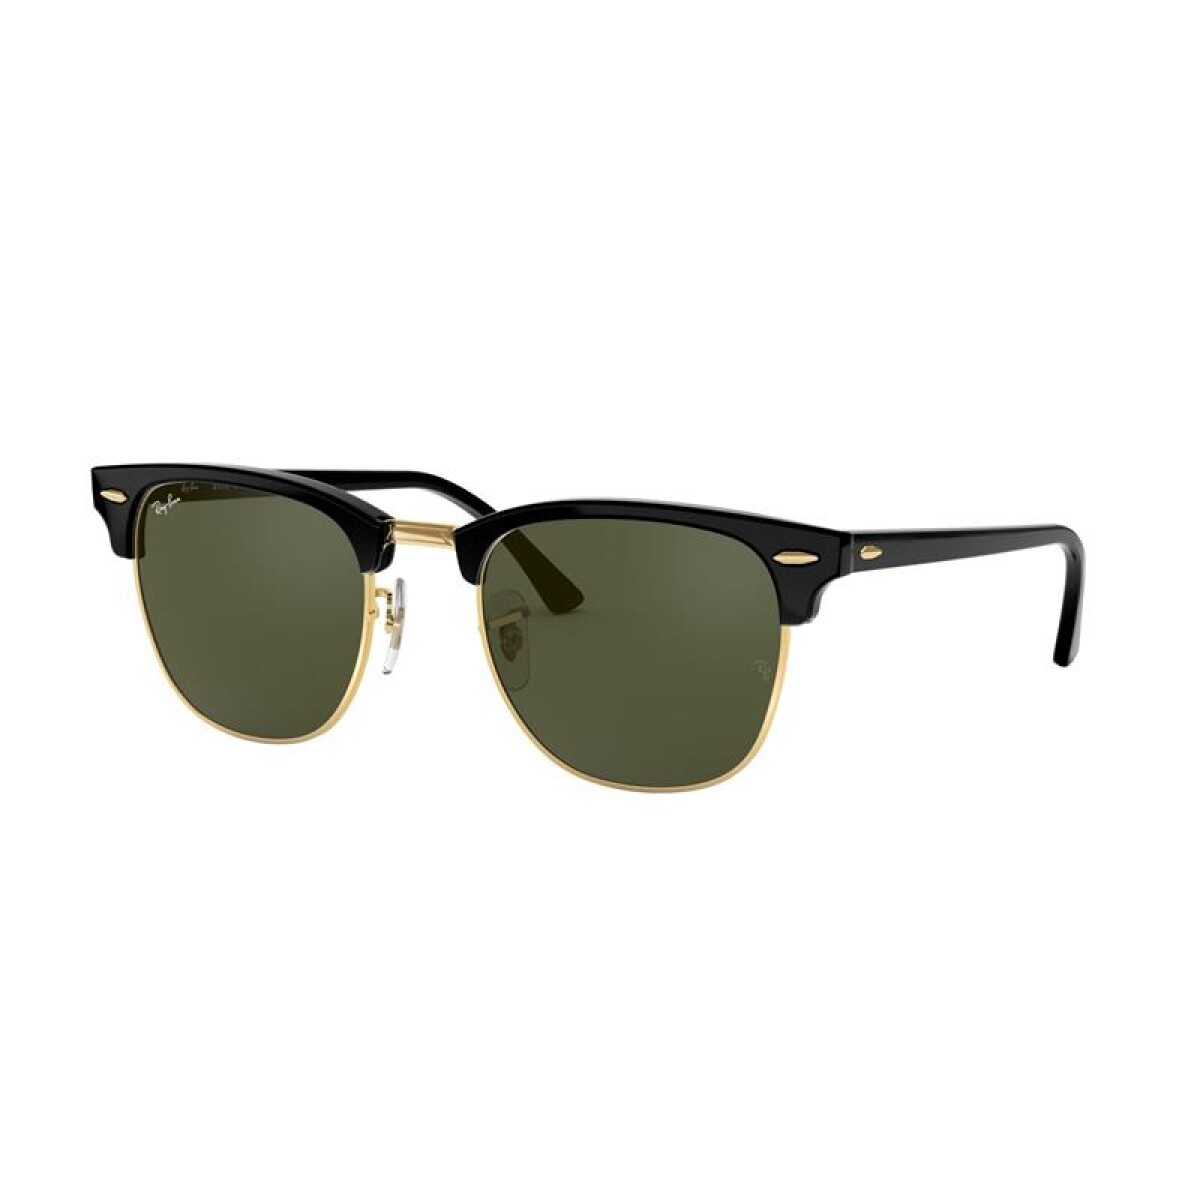 Ray Ban Rb3016 - W0365 